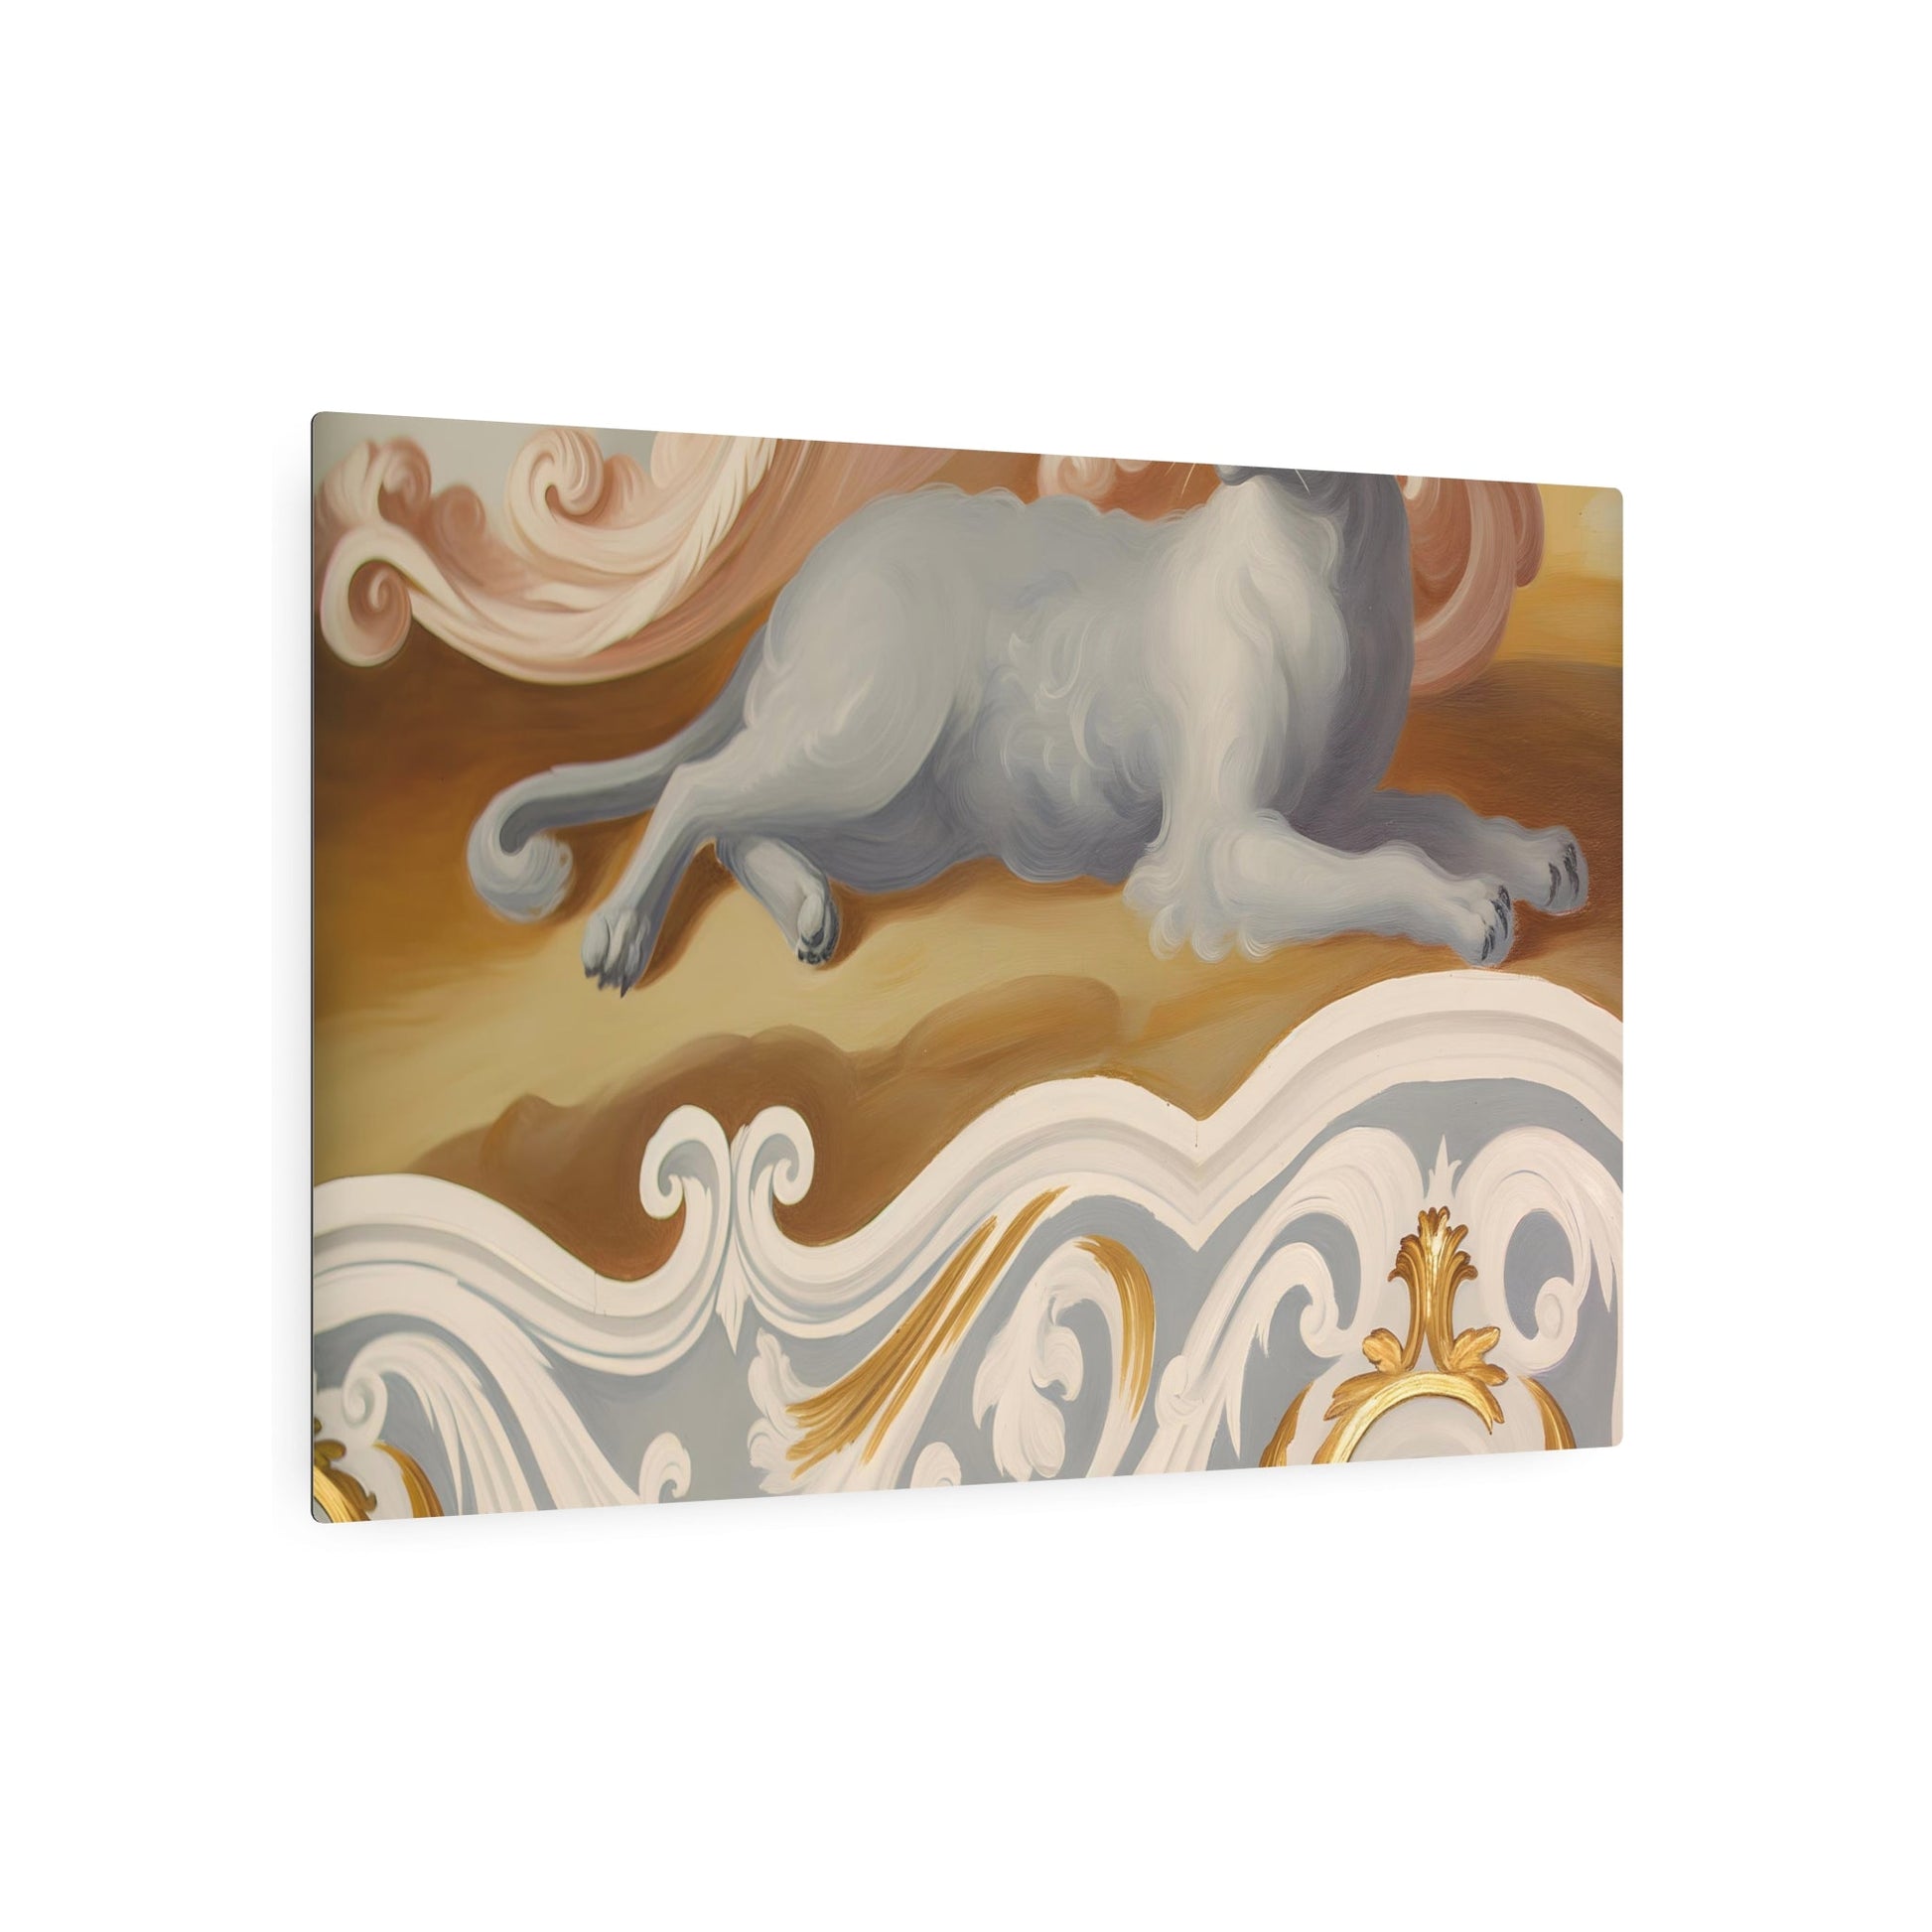 Metal Poster Art | "Rococo Style Western Art - Elegant Pastel Painting of Cat Lounging on Intricately Decorated Furniture with Gilded Carvings - Metal Poster Art 36″ x 24″ (Horizontal) 0.12''